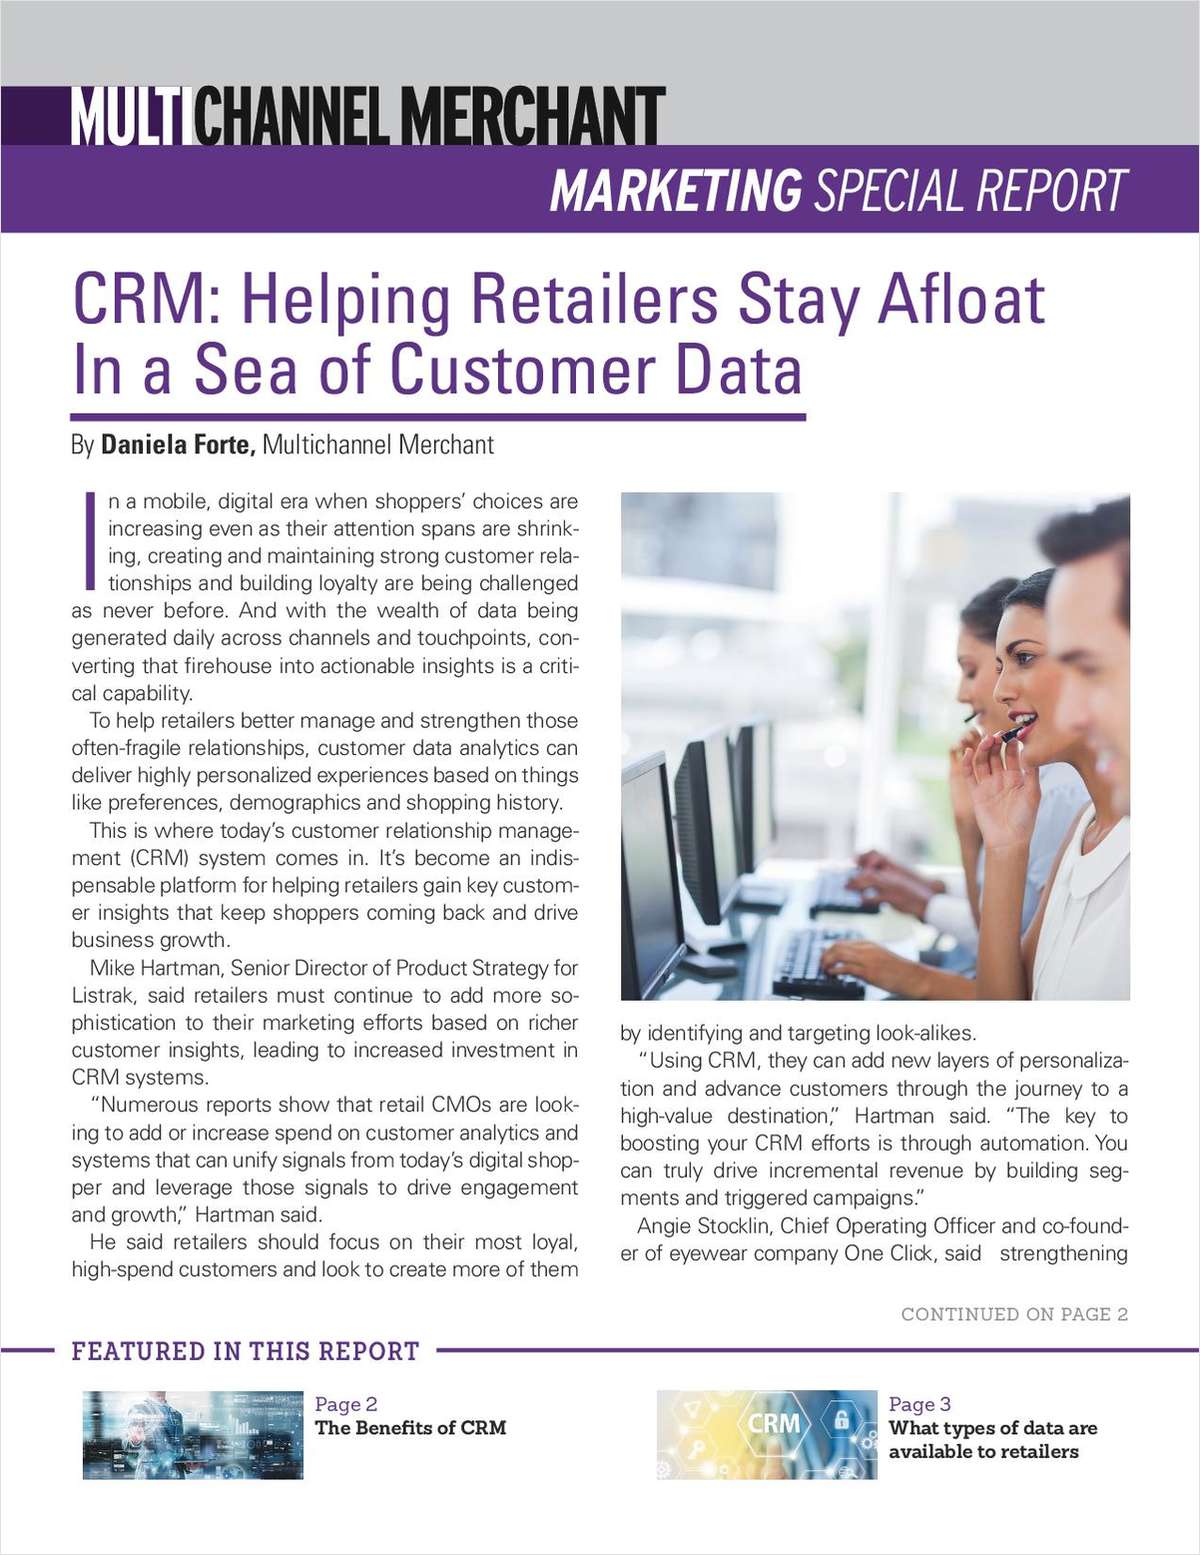 Using Data to Better Manage Customer Relationships